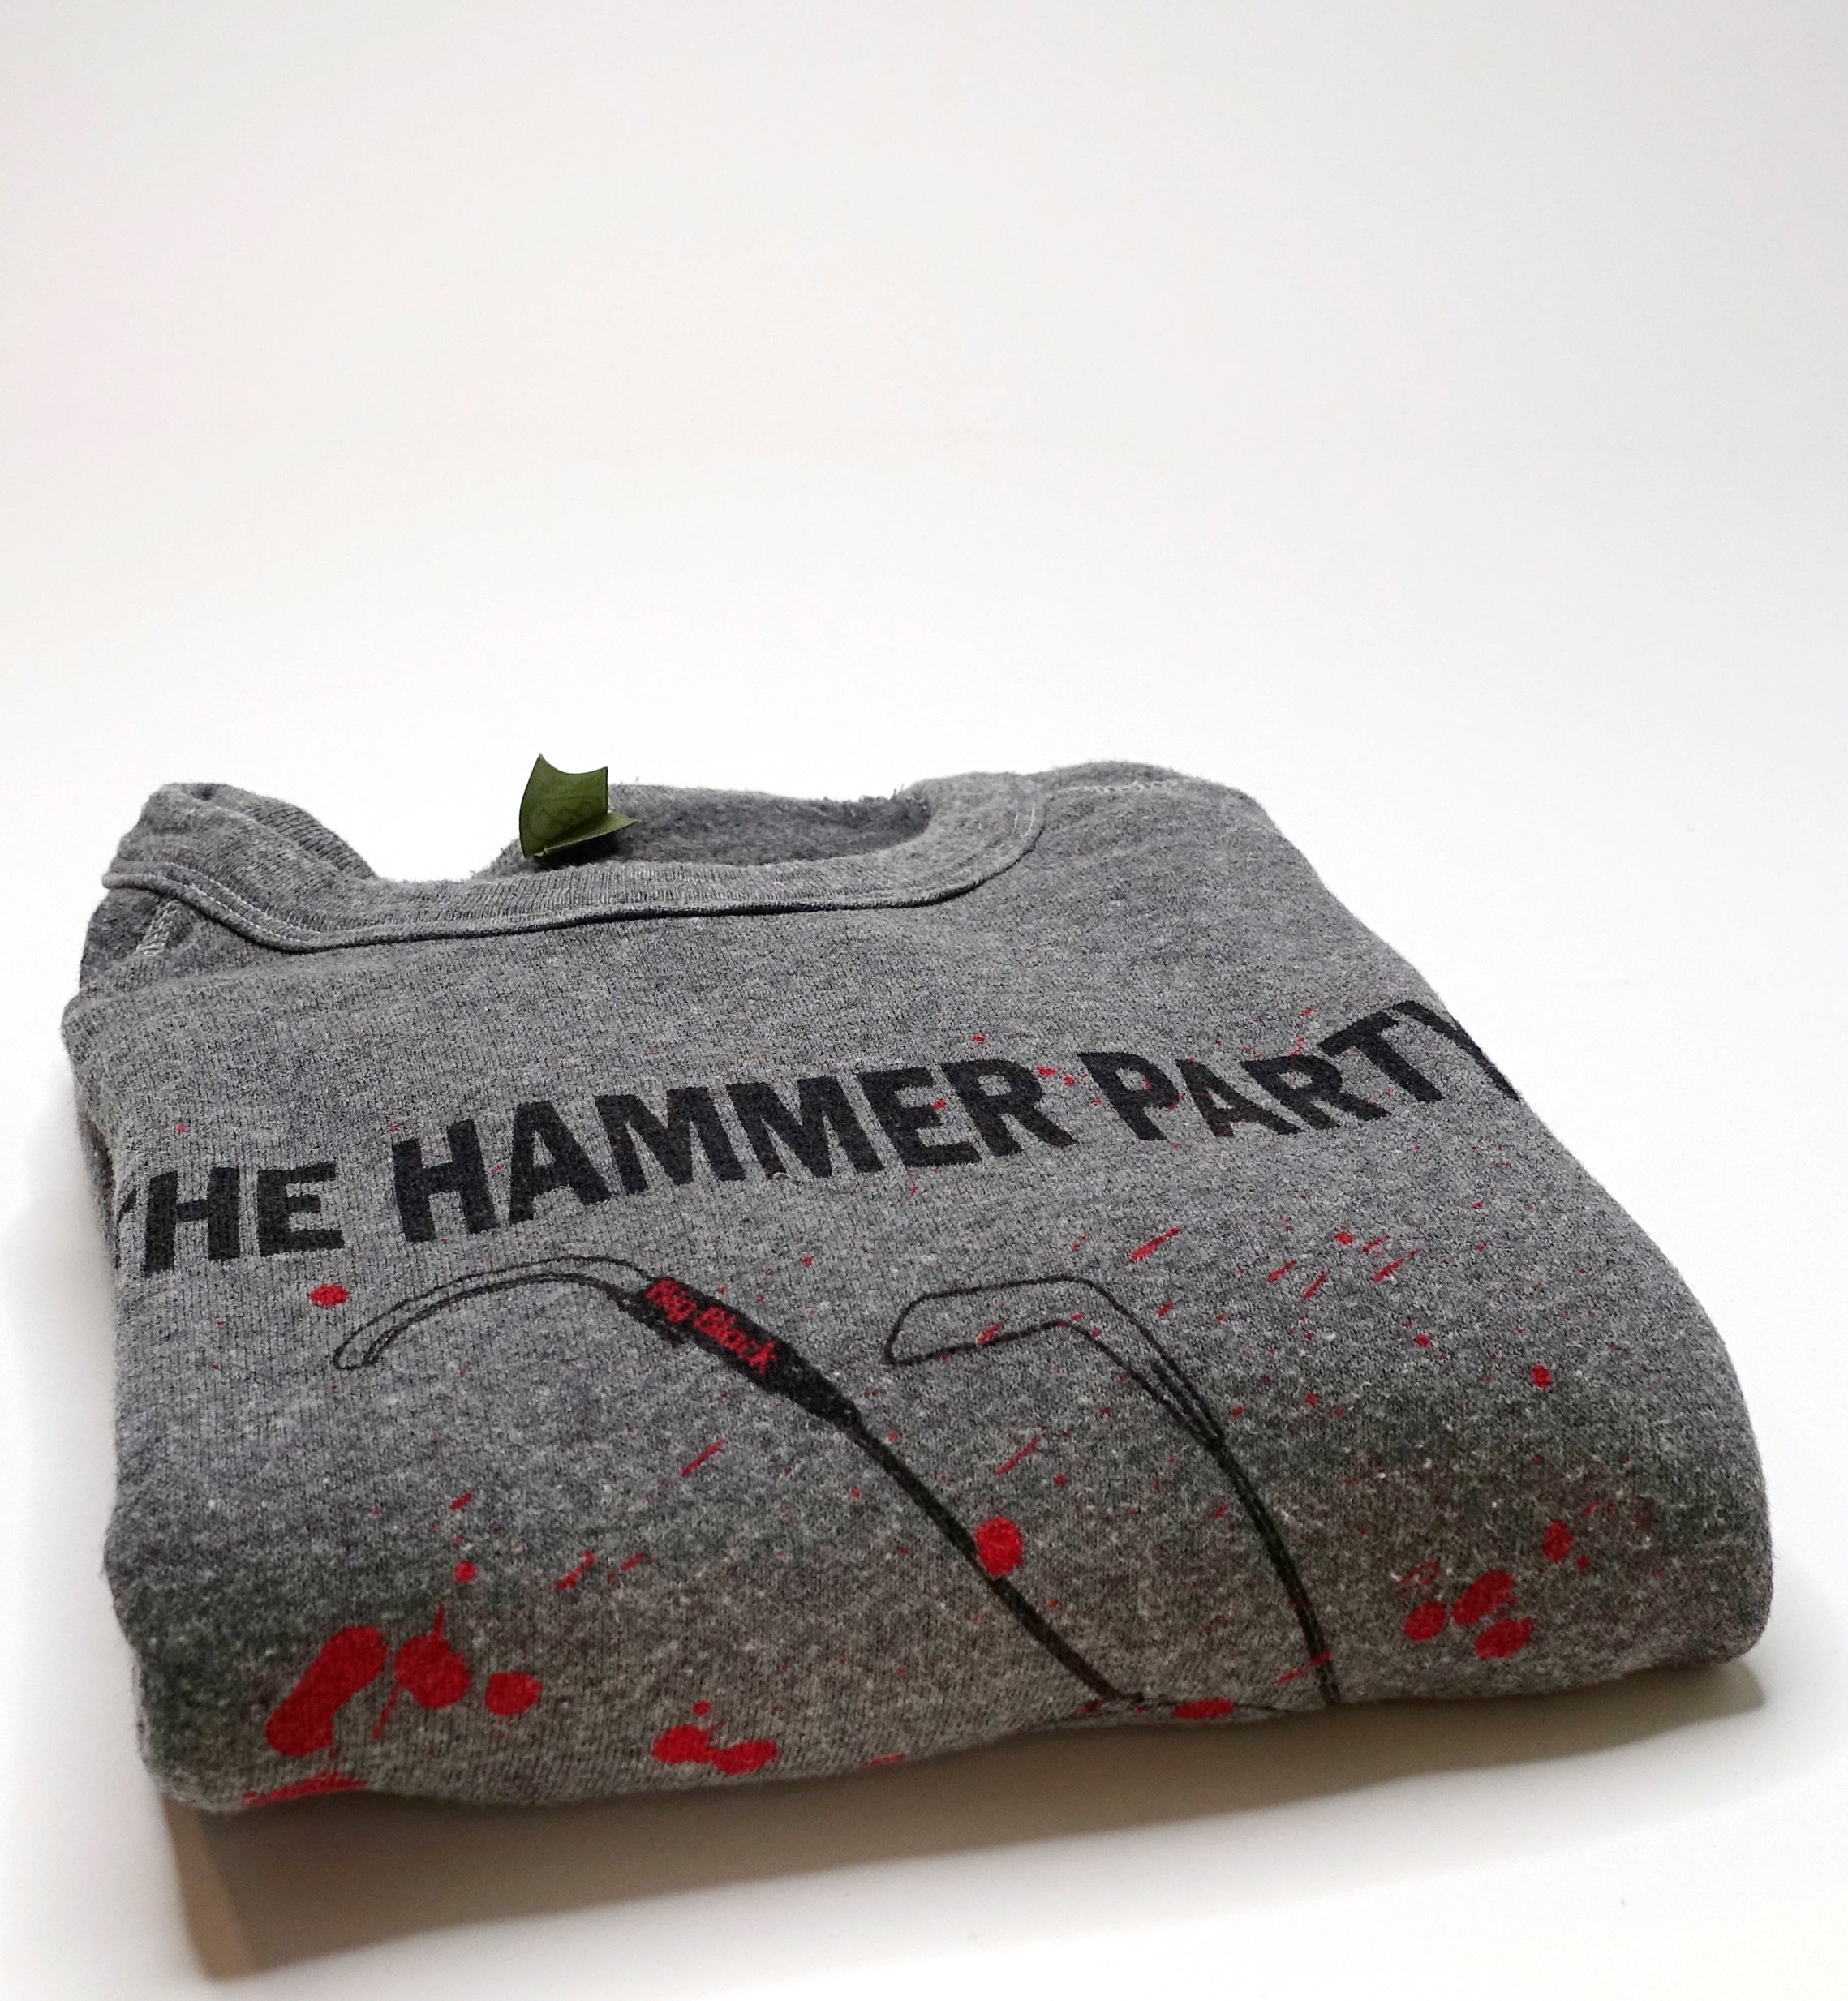 Big Black - Hammer Party (Bootleg By Me) Sweat Shirt Size XL